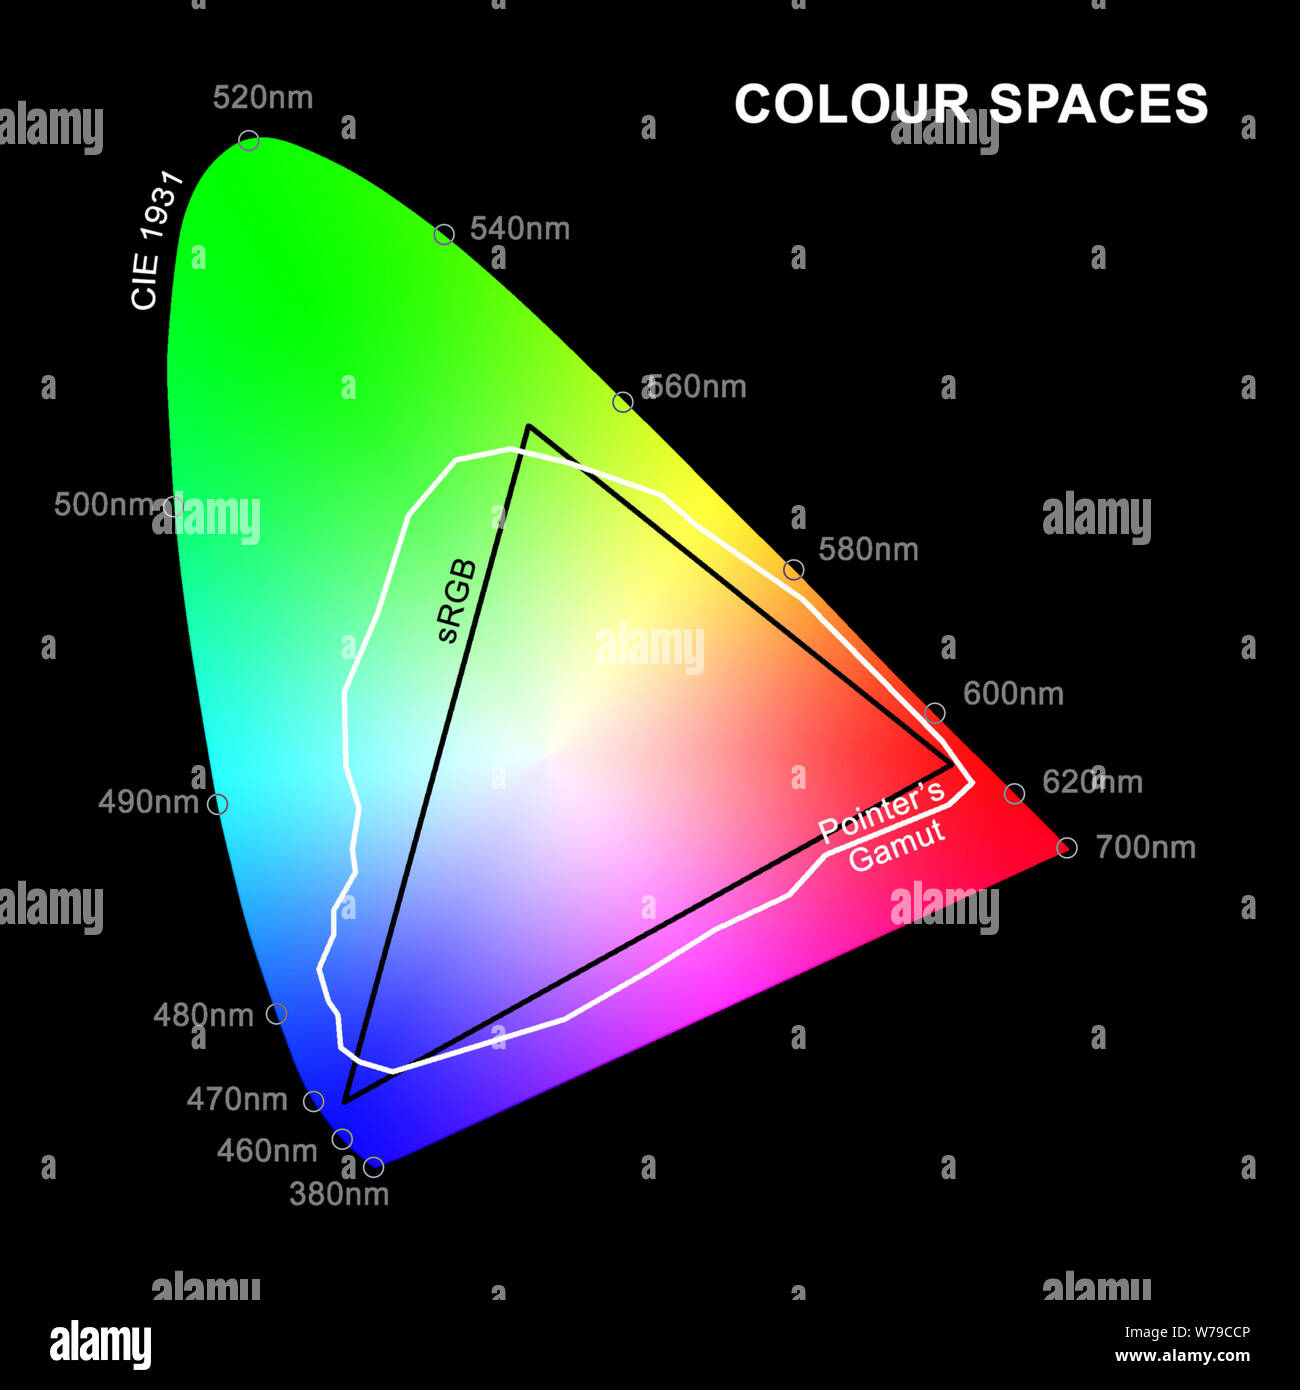 An illustration of sRGB and Pointer's Gamut colour spaces overlaid on CIE 1931 Chromaticity Diagram of human colour perception Stock Photo